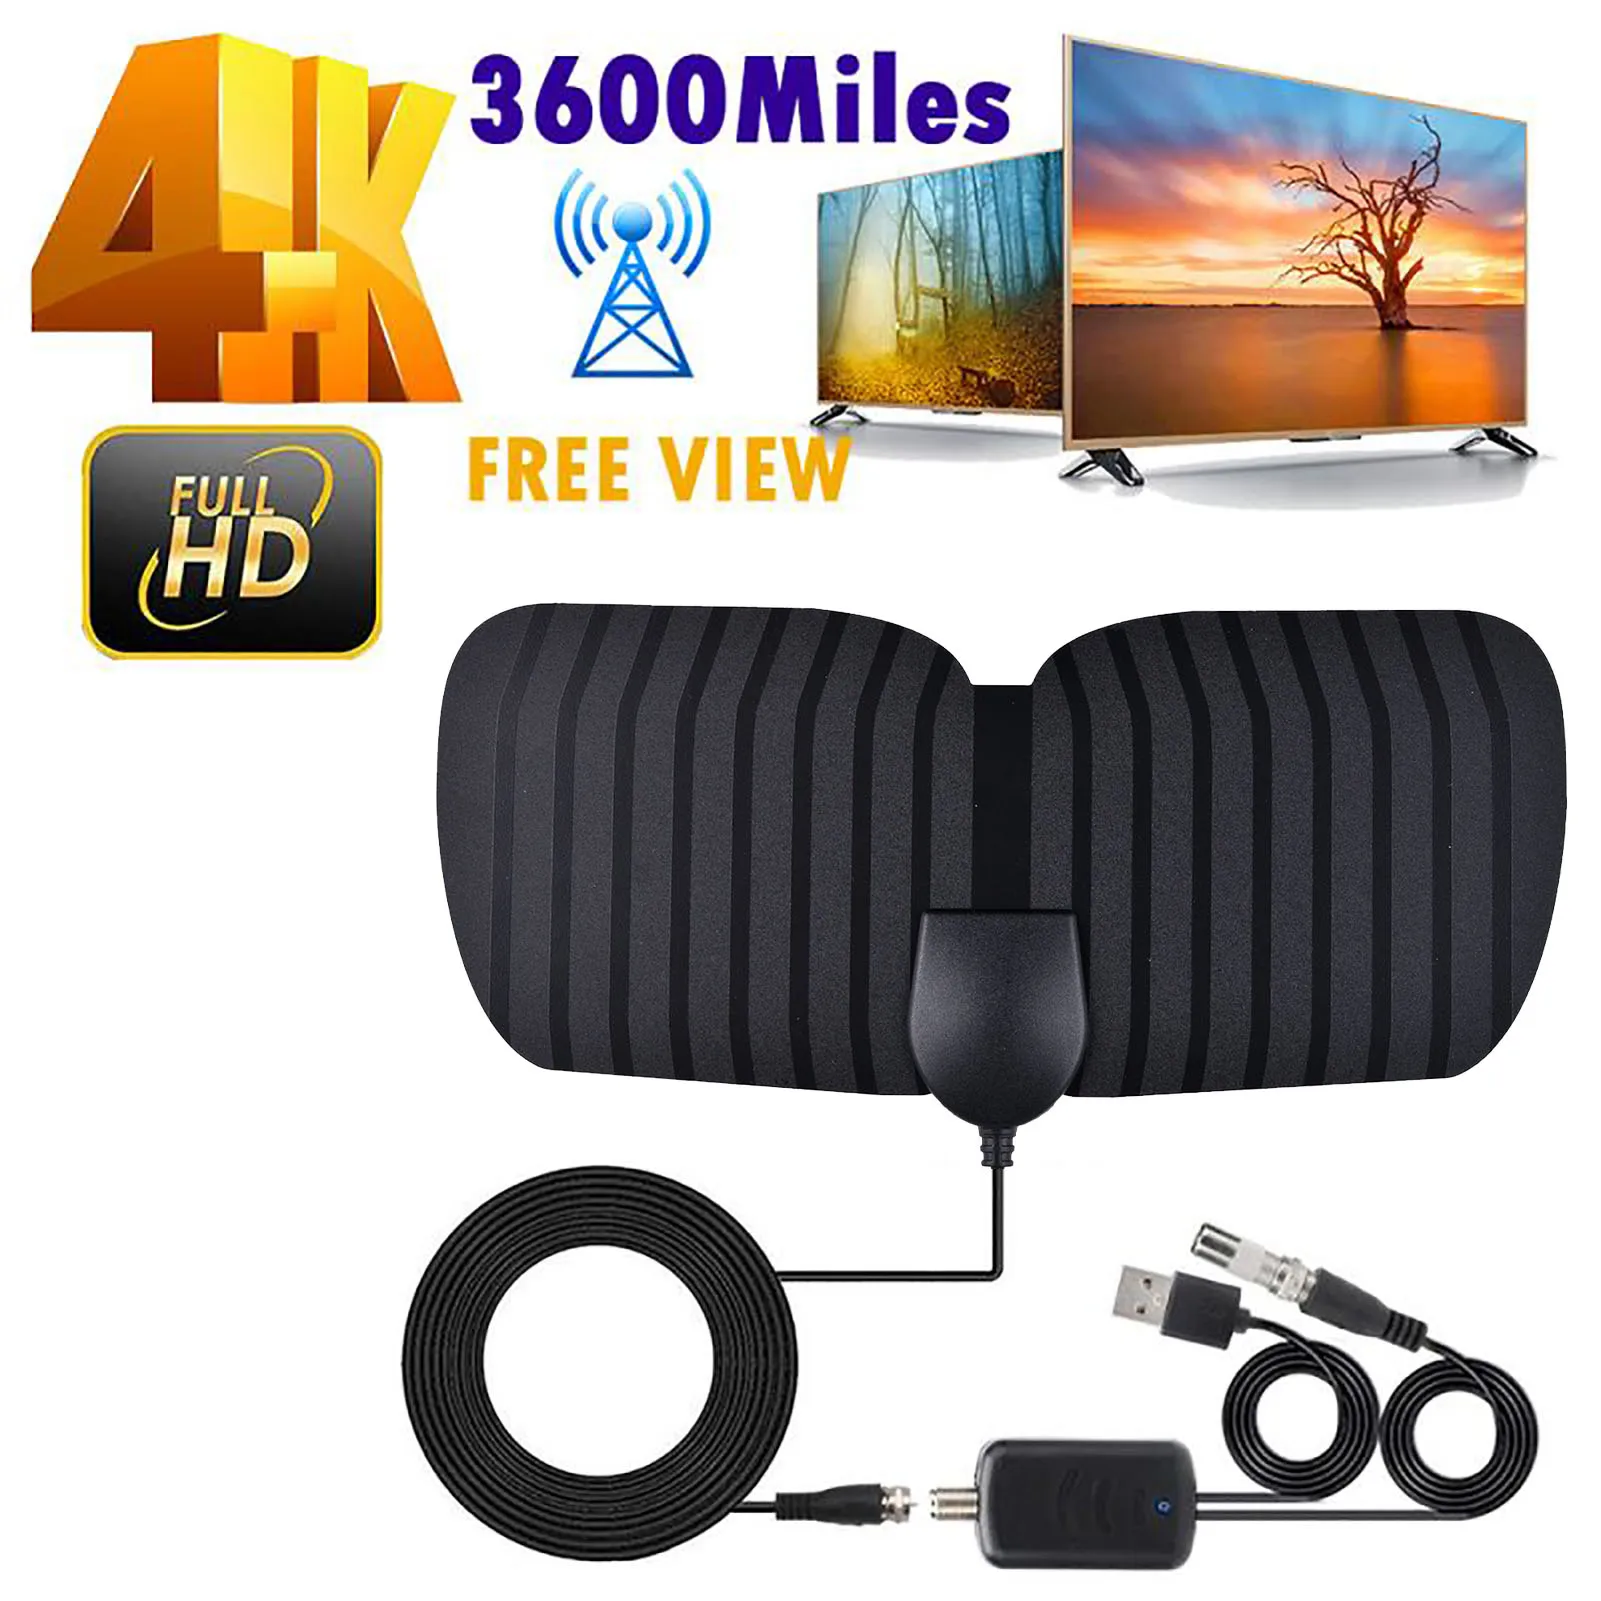 

HD 4K TV Antenna 360 Degree Signal Reception 1080P Indoor Digital Antenna Amplified HD Digital TV Antenna With Powerful Signal